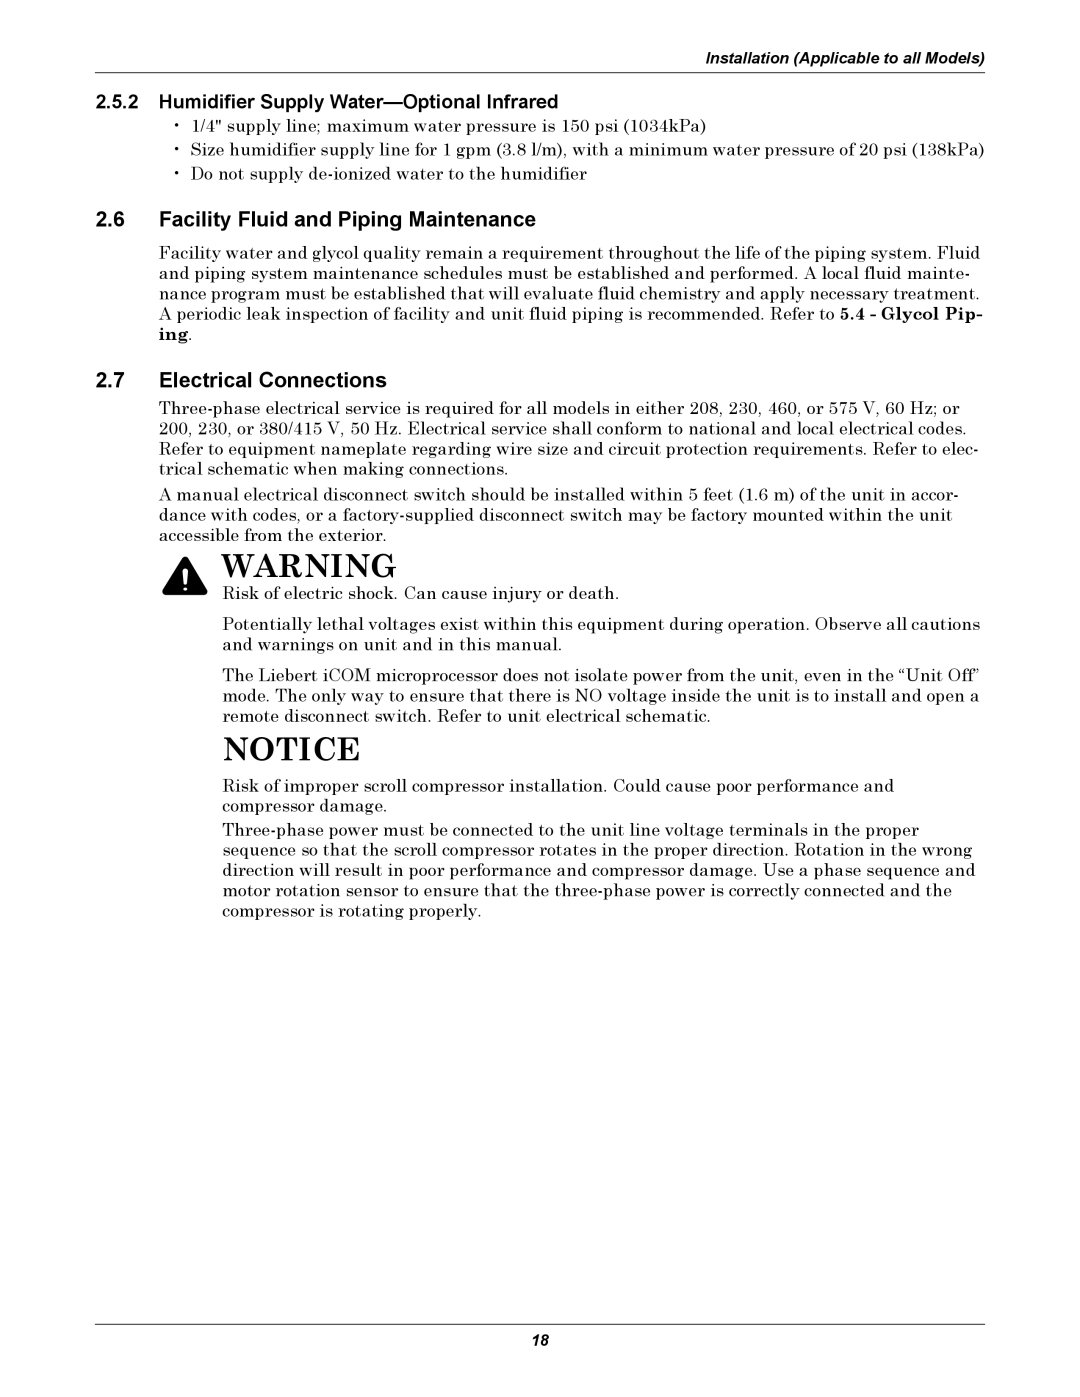 Emerson 3000 installation manual 2.6Facility Fluid and Piping Maintenance, 2.7Electrical Connections 